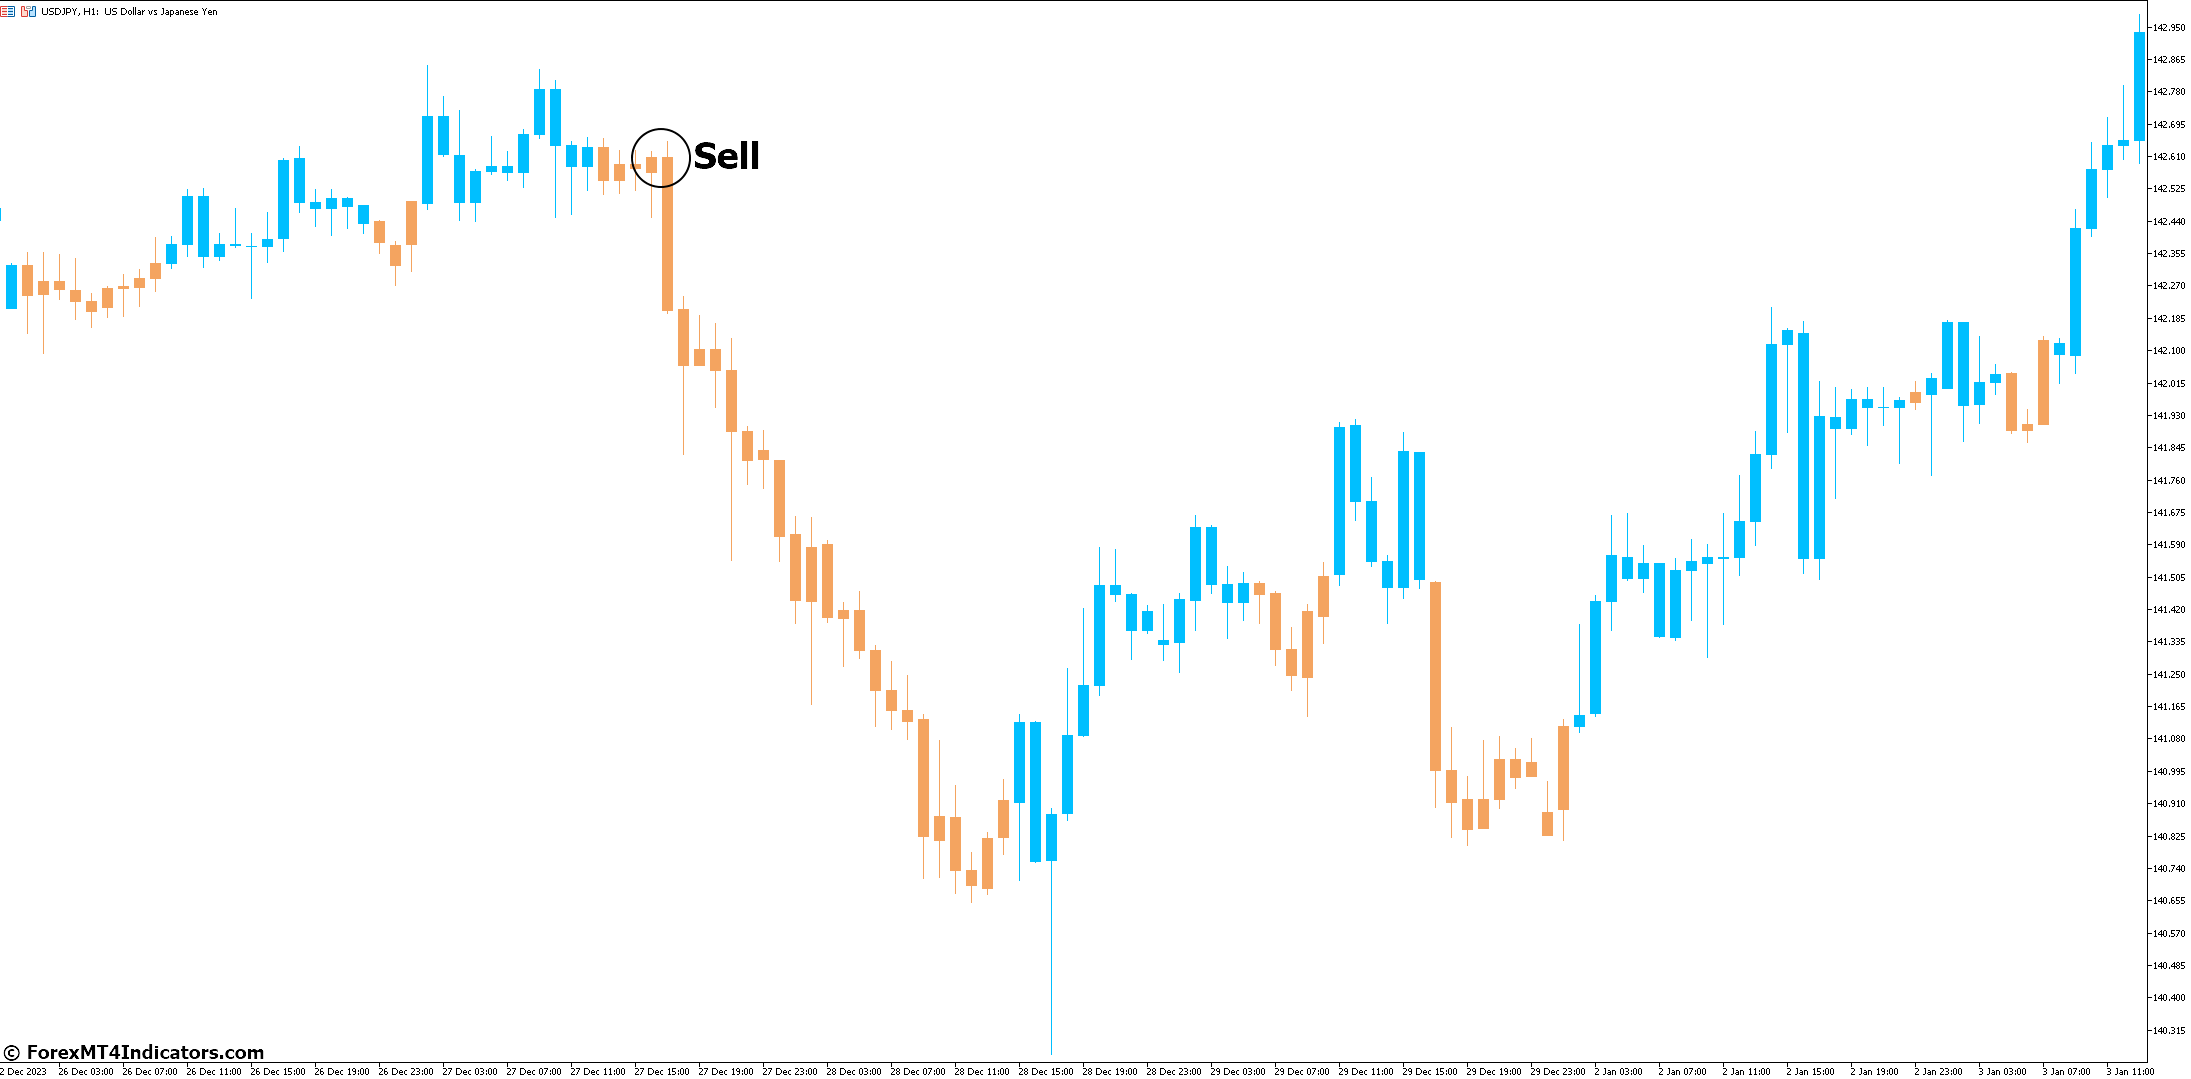 How to Trade with Hull Trend Indicator - Sell Entry